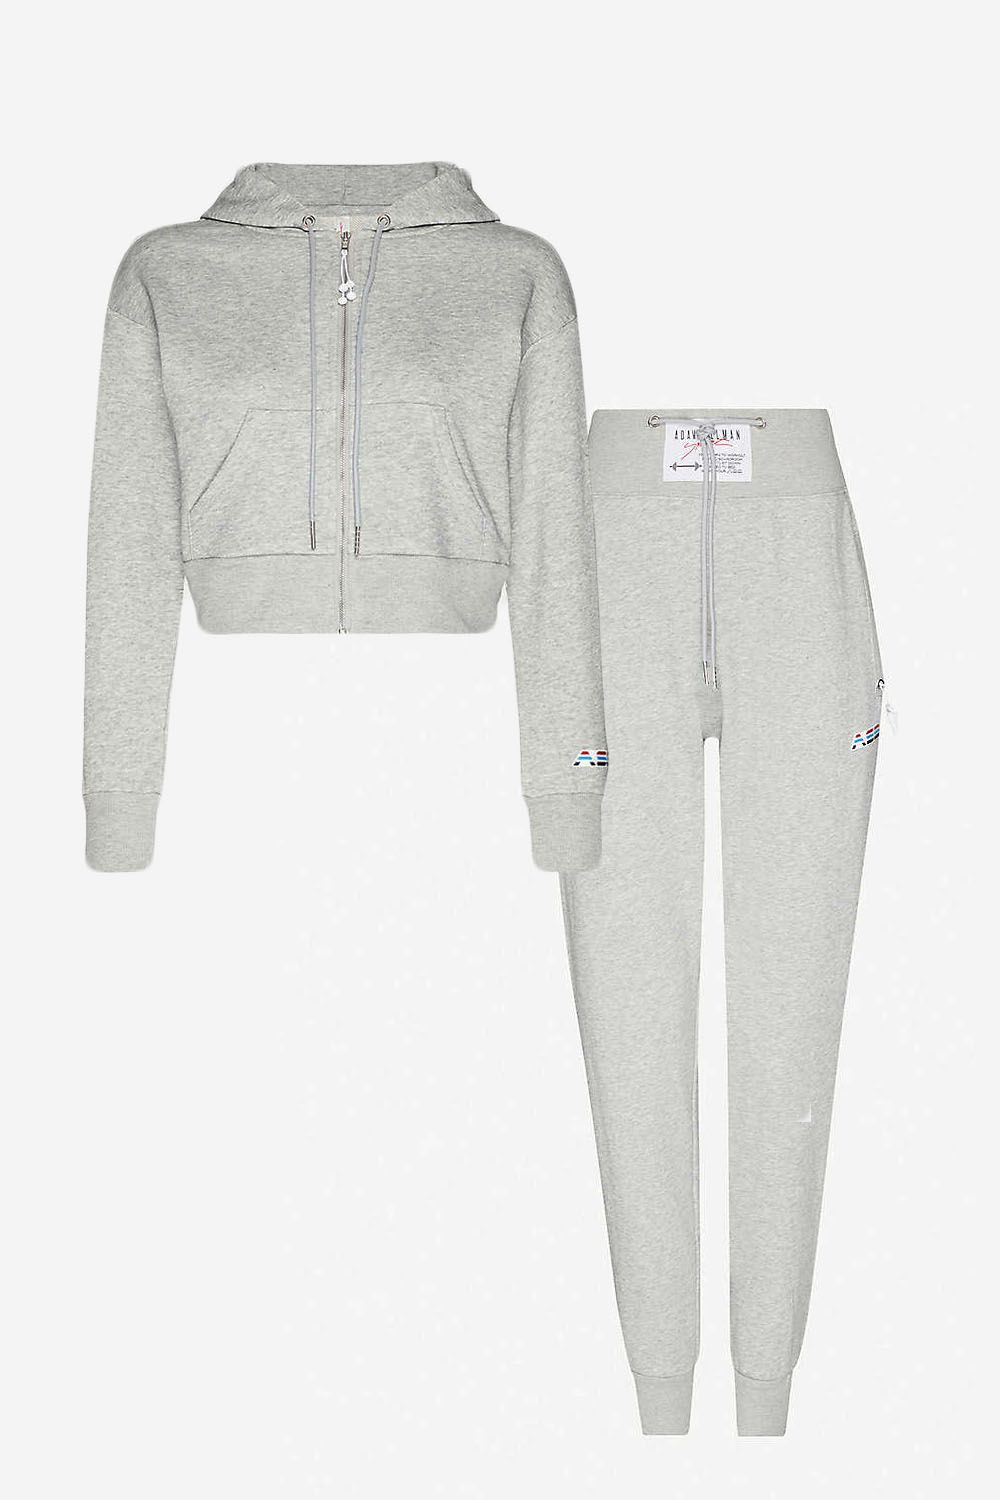 13 best tracksuits to wear when you're WFH